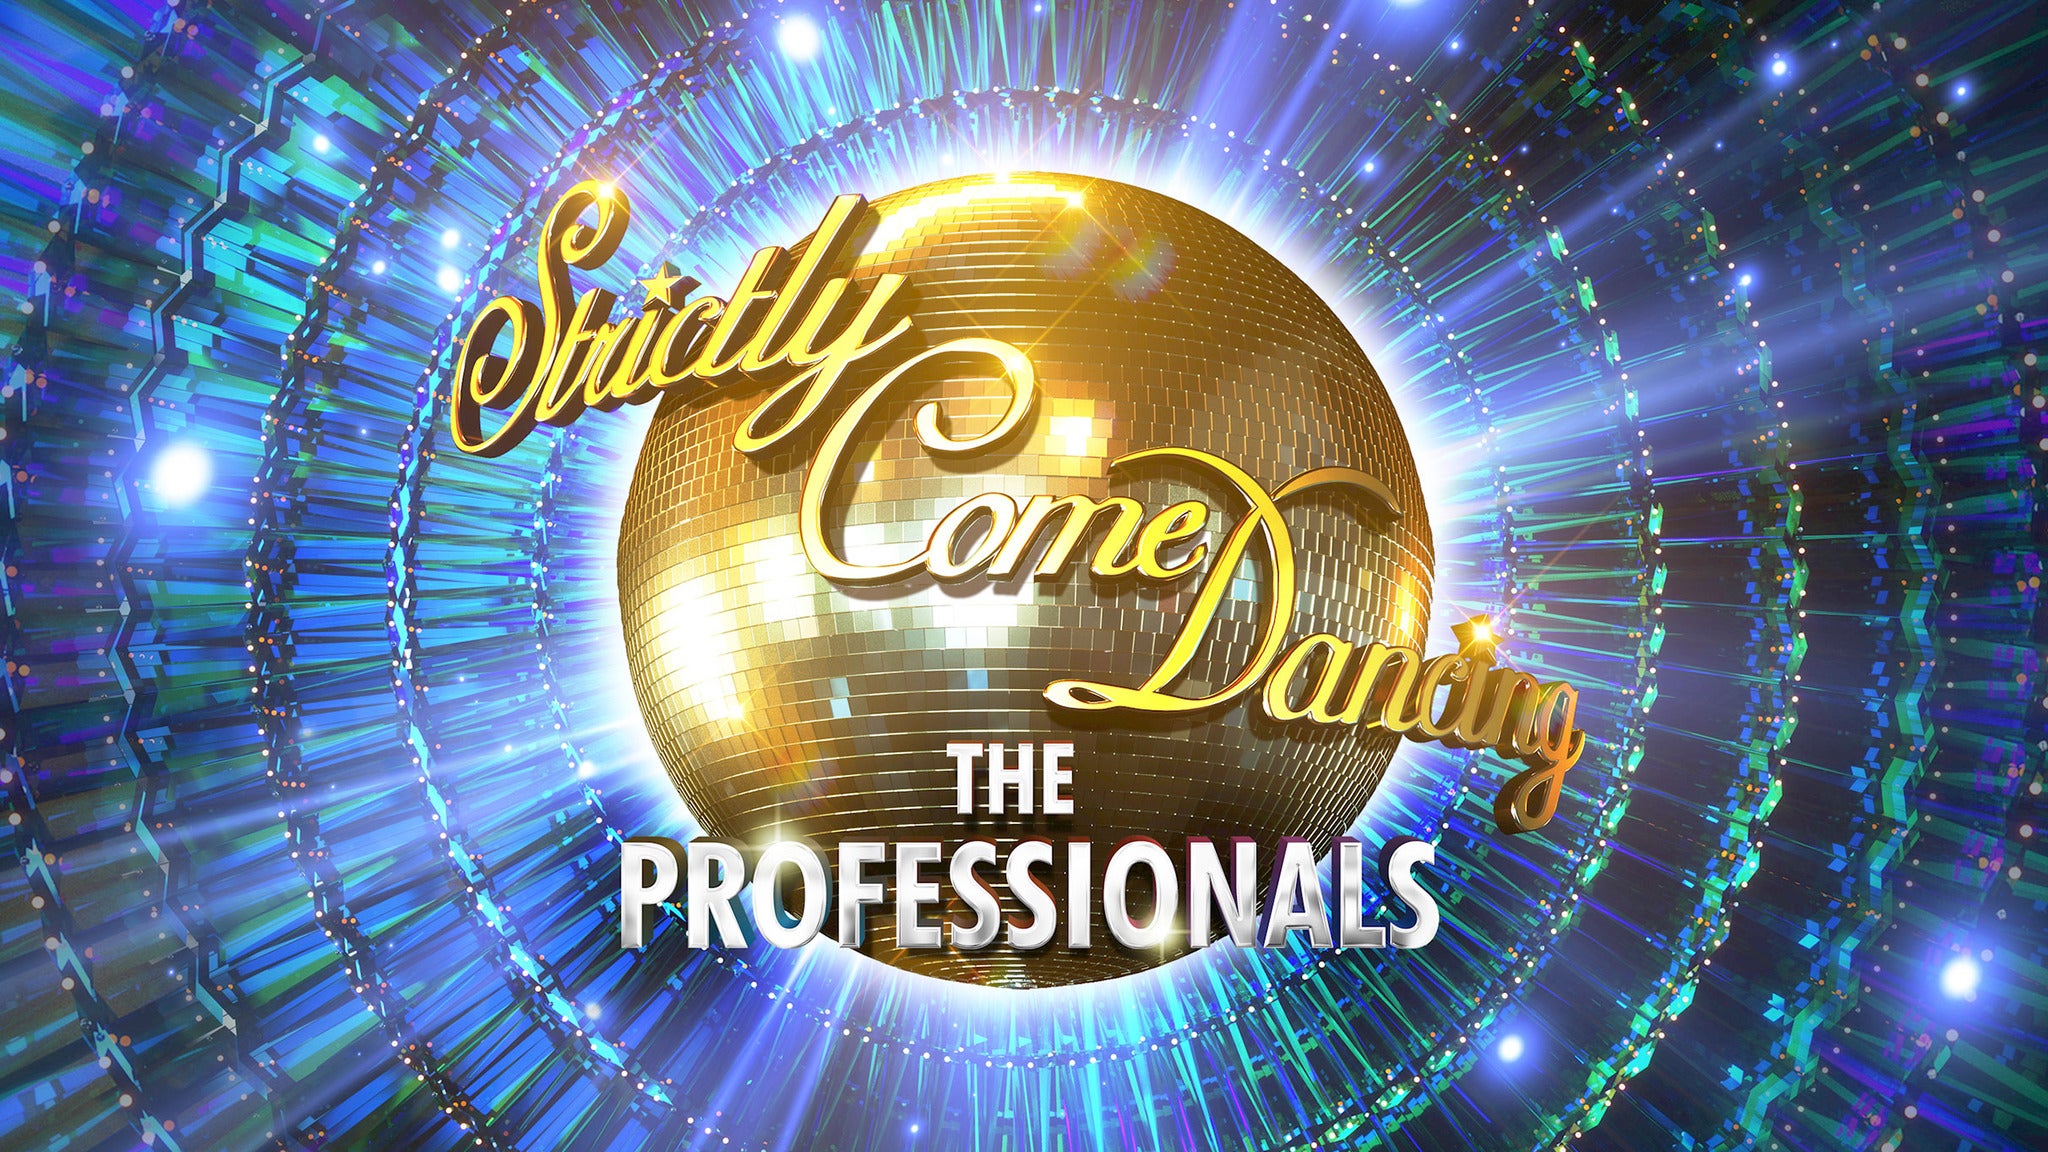 Strictly Come Dancing the Professionals Tour 2021 Event Title Pic